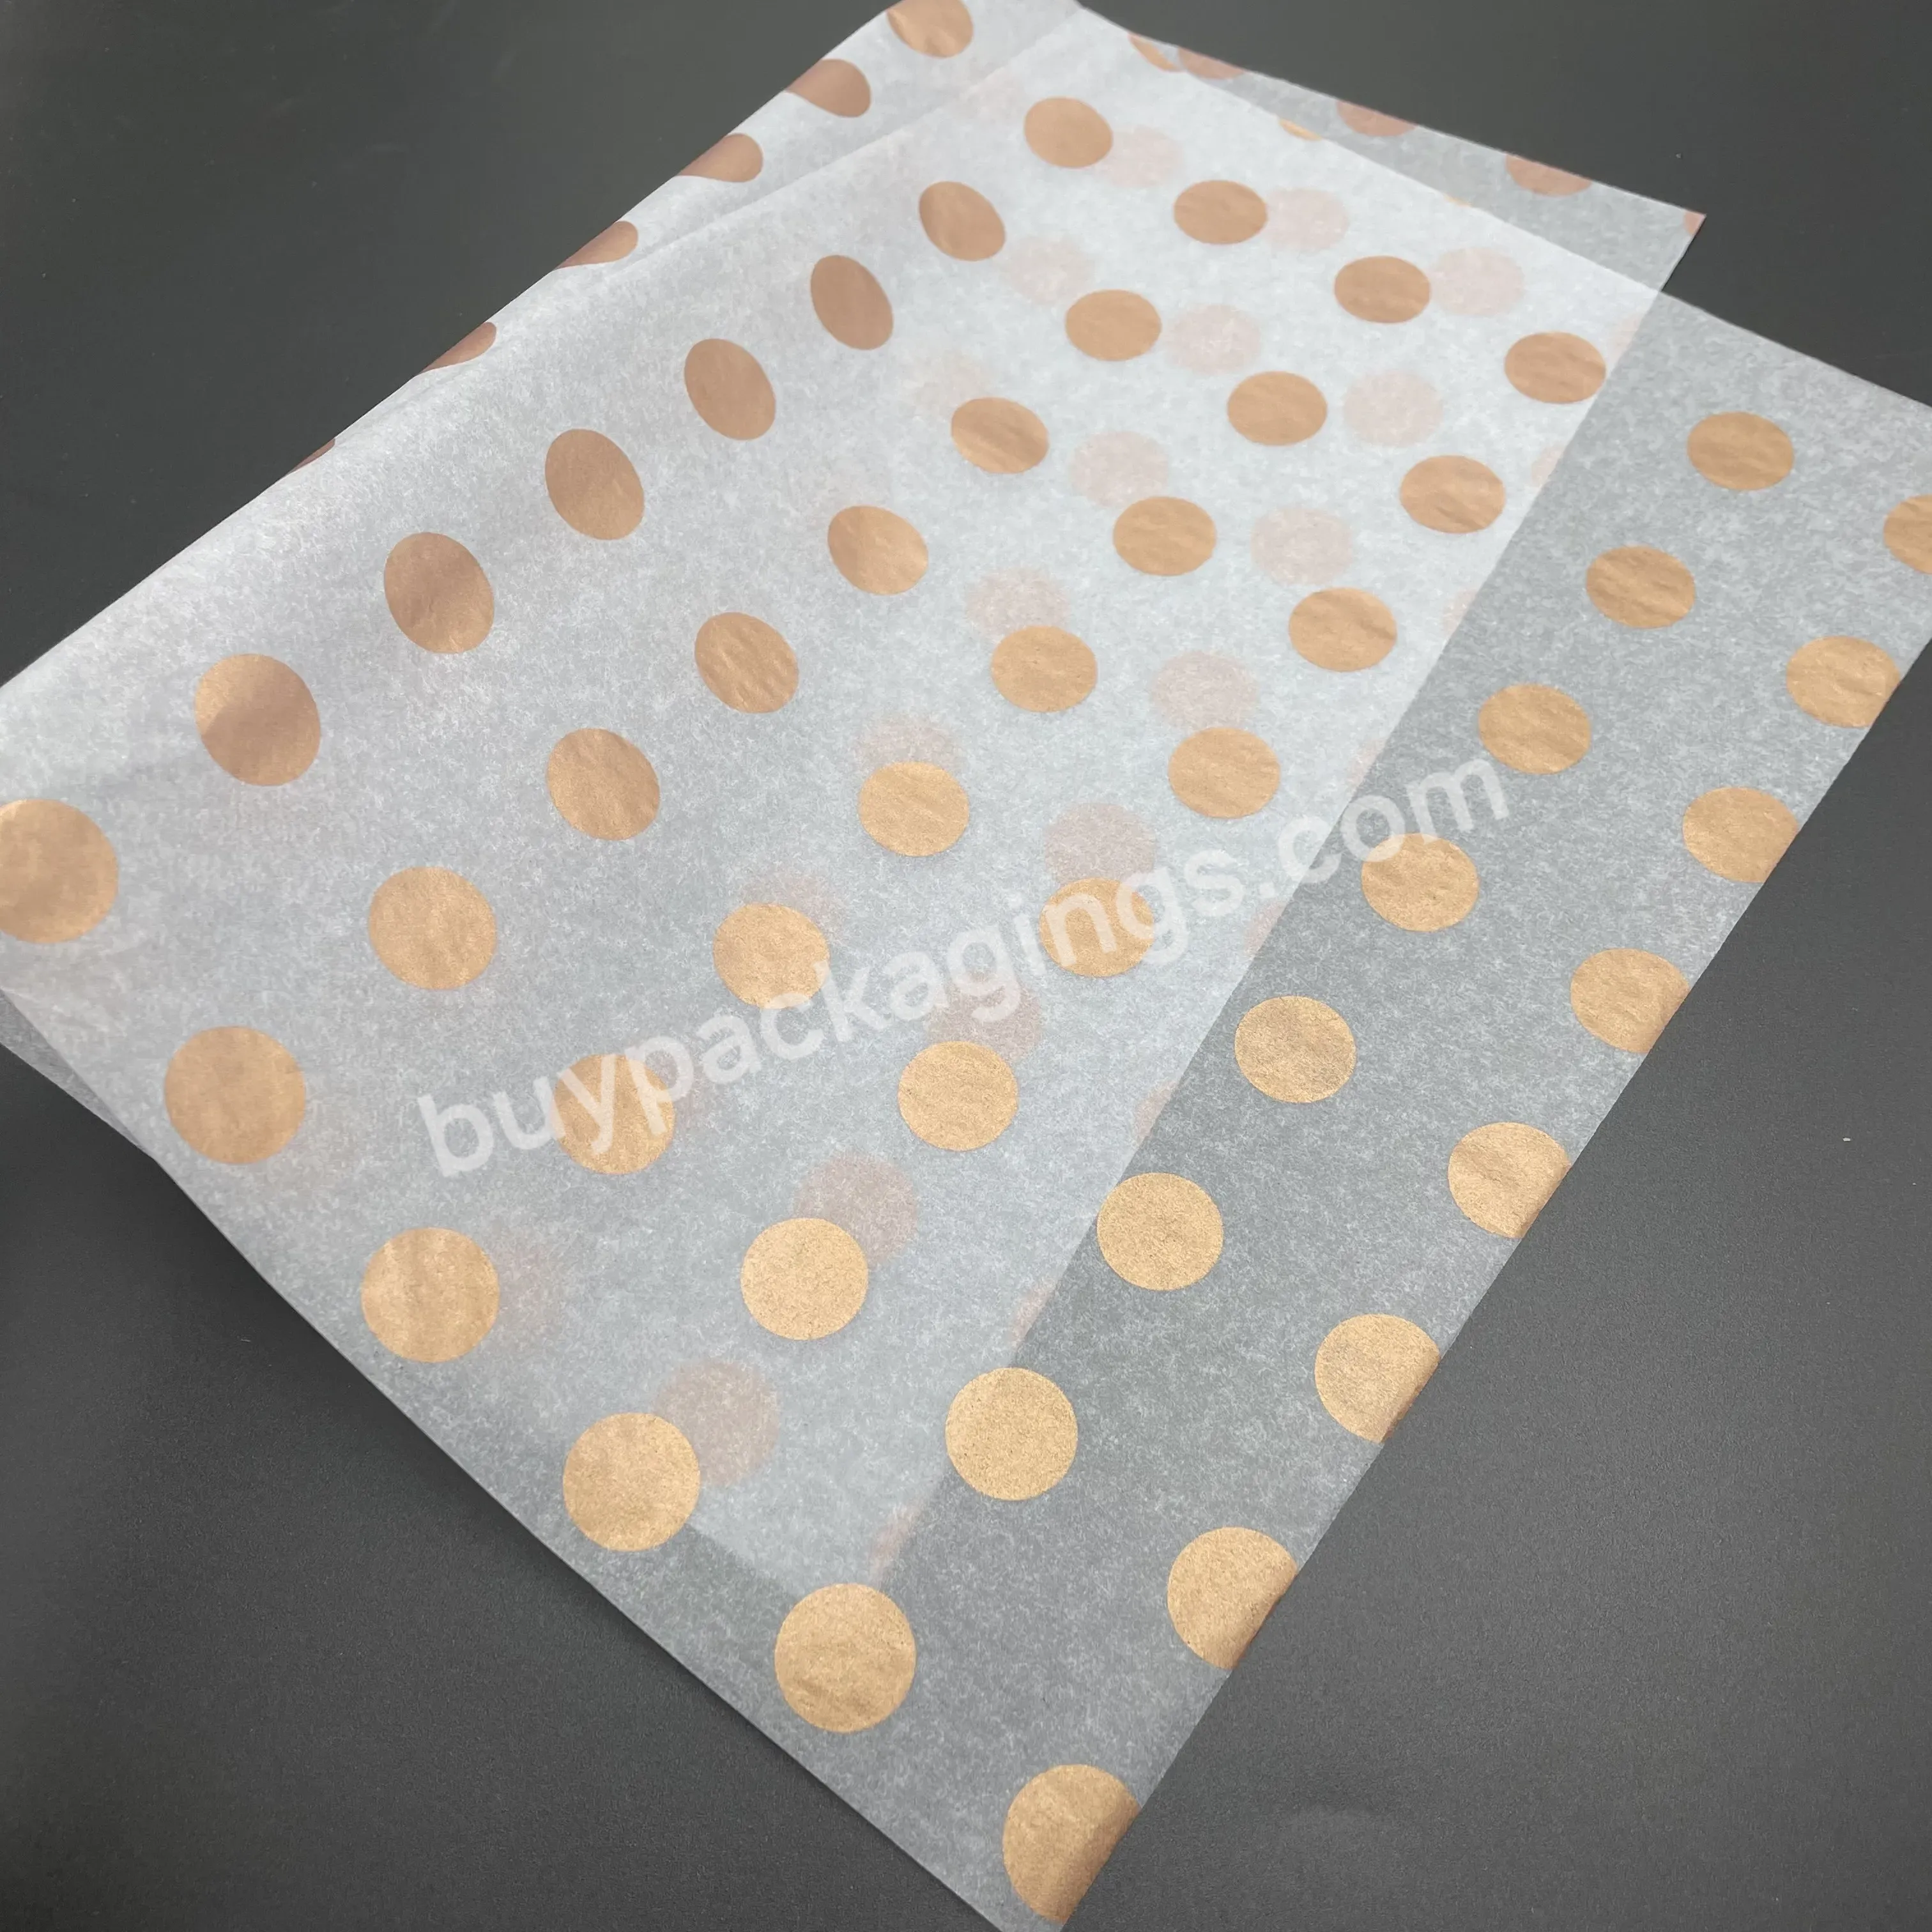 17g Acid Free White Tissue Paper With Metallic Rose Gold Color Circle Printed Logo Wrapping Paper/mf Acid Free Tissue Paper - Buy Mf Acid Free Tissue Paper,Metallic Gold Color Tissue Paper,Acid Free Tissue Paper.